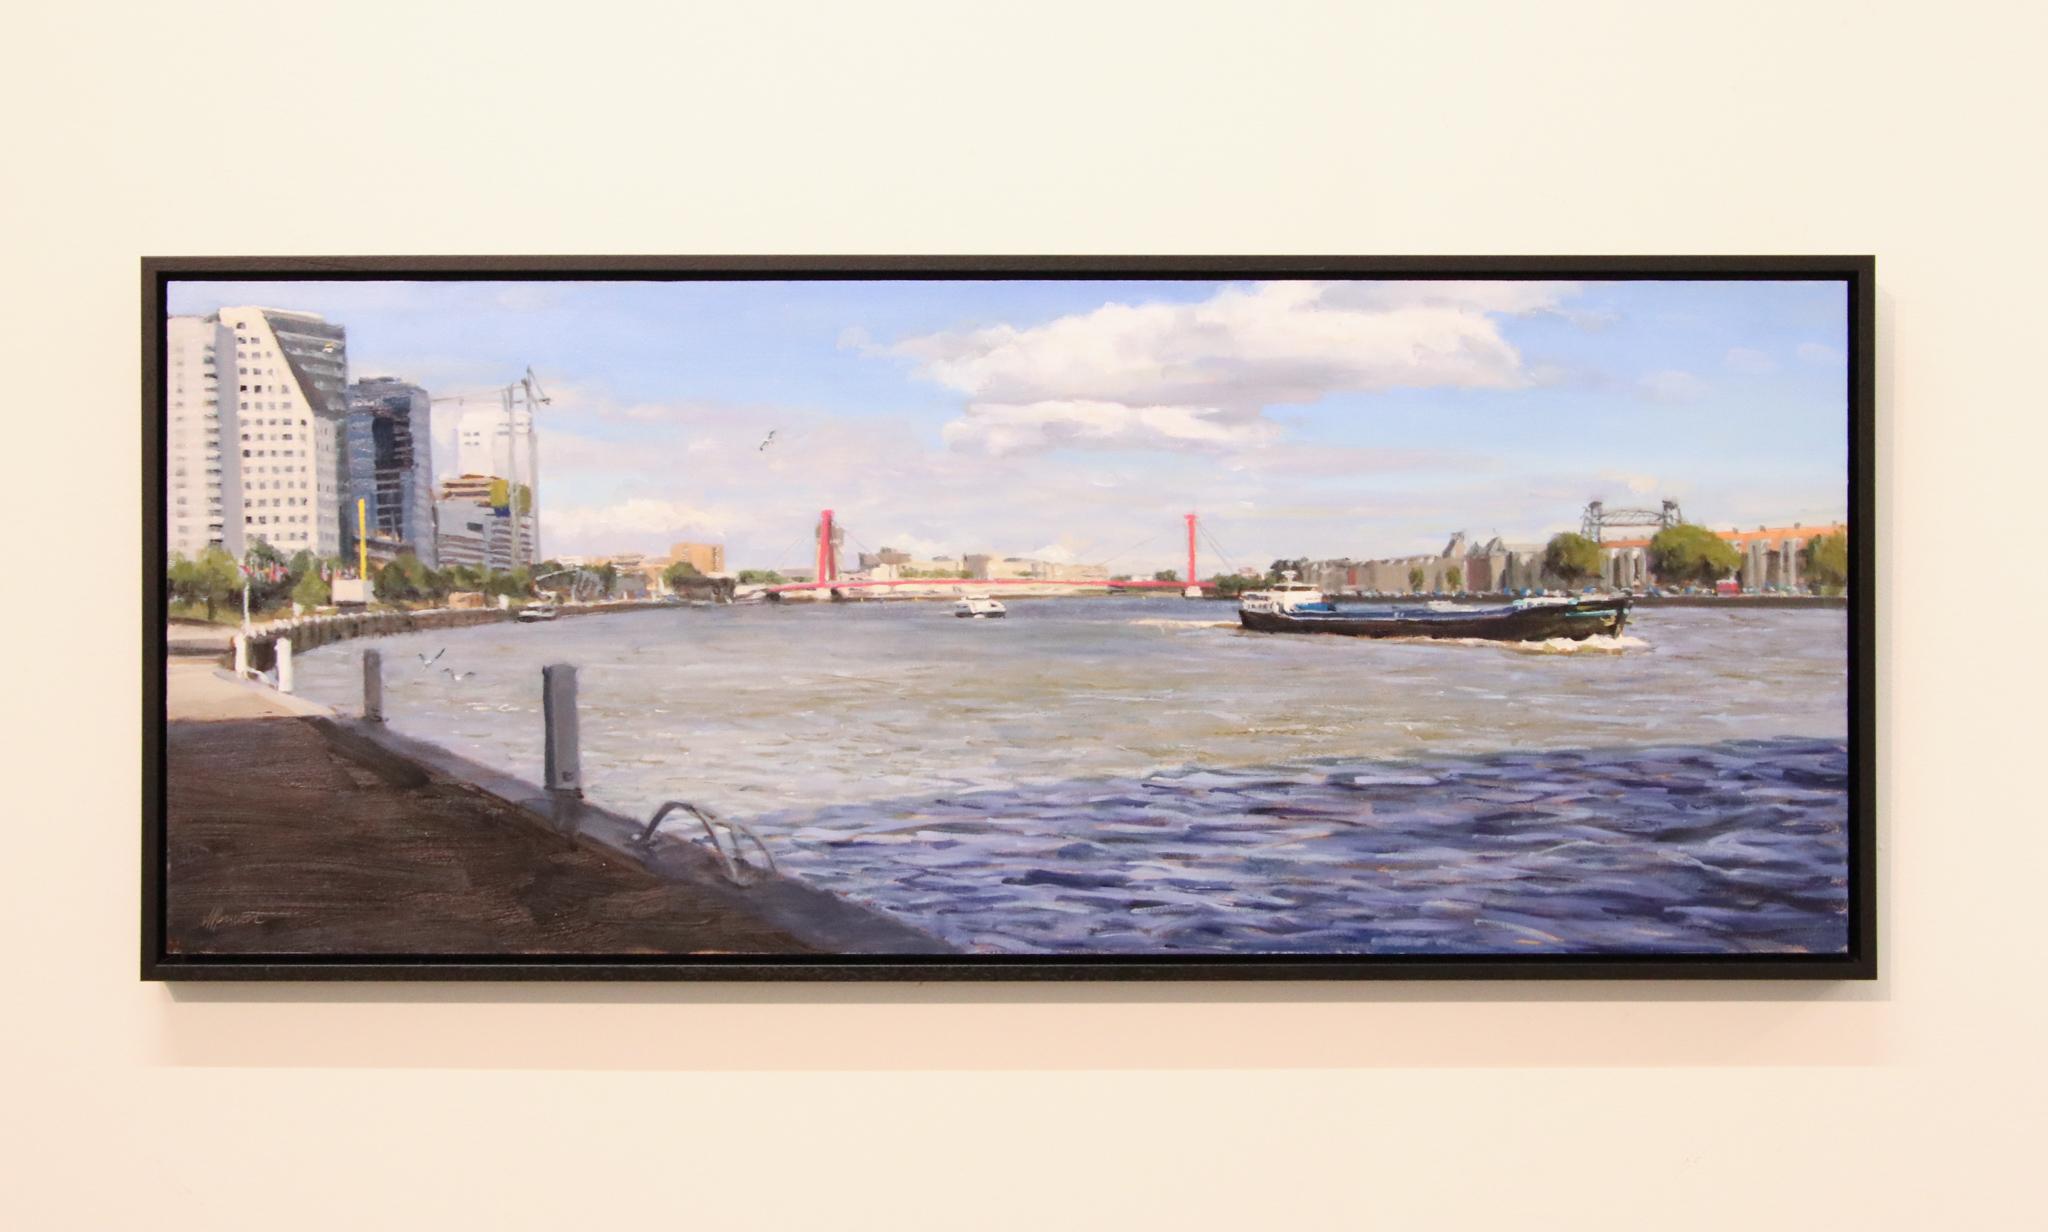 Rotterdam - 21st Century Contemporary Cityscape of the famous Dutch Portcity - Painting by Richard van Mensvoort